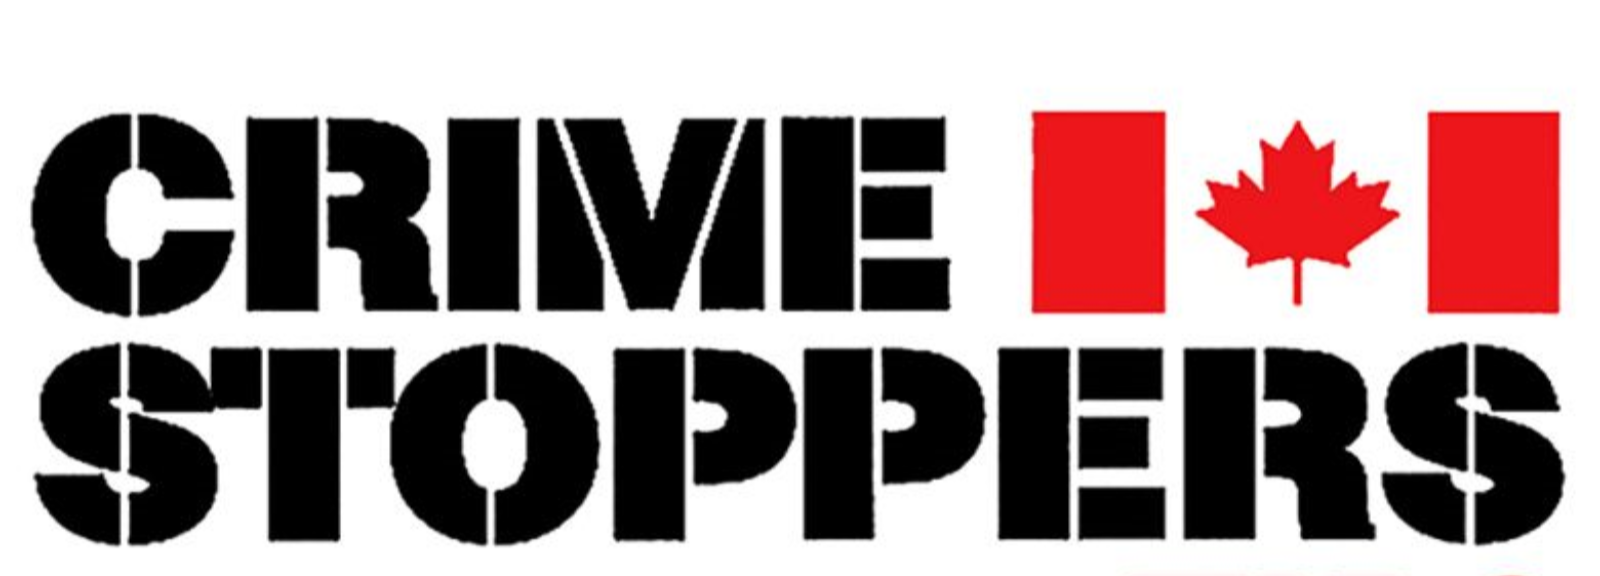 CRIME STOPPERS LOGO